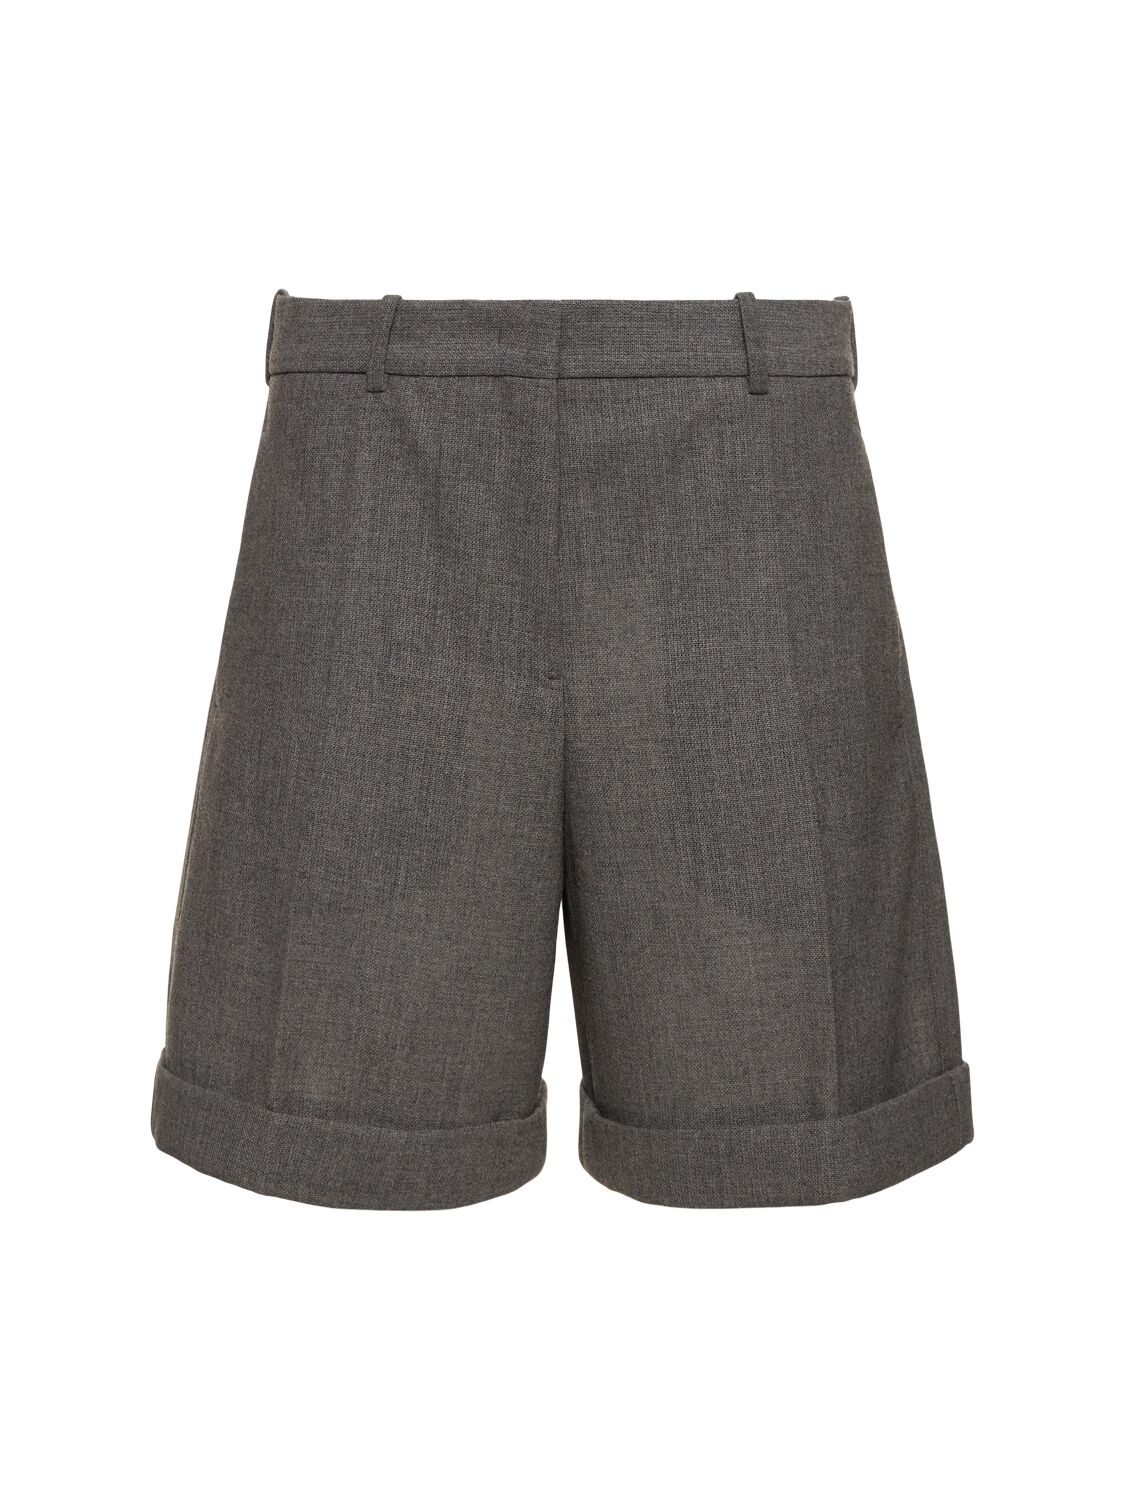 Image of Wool Canvas Shorts